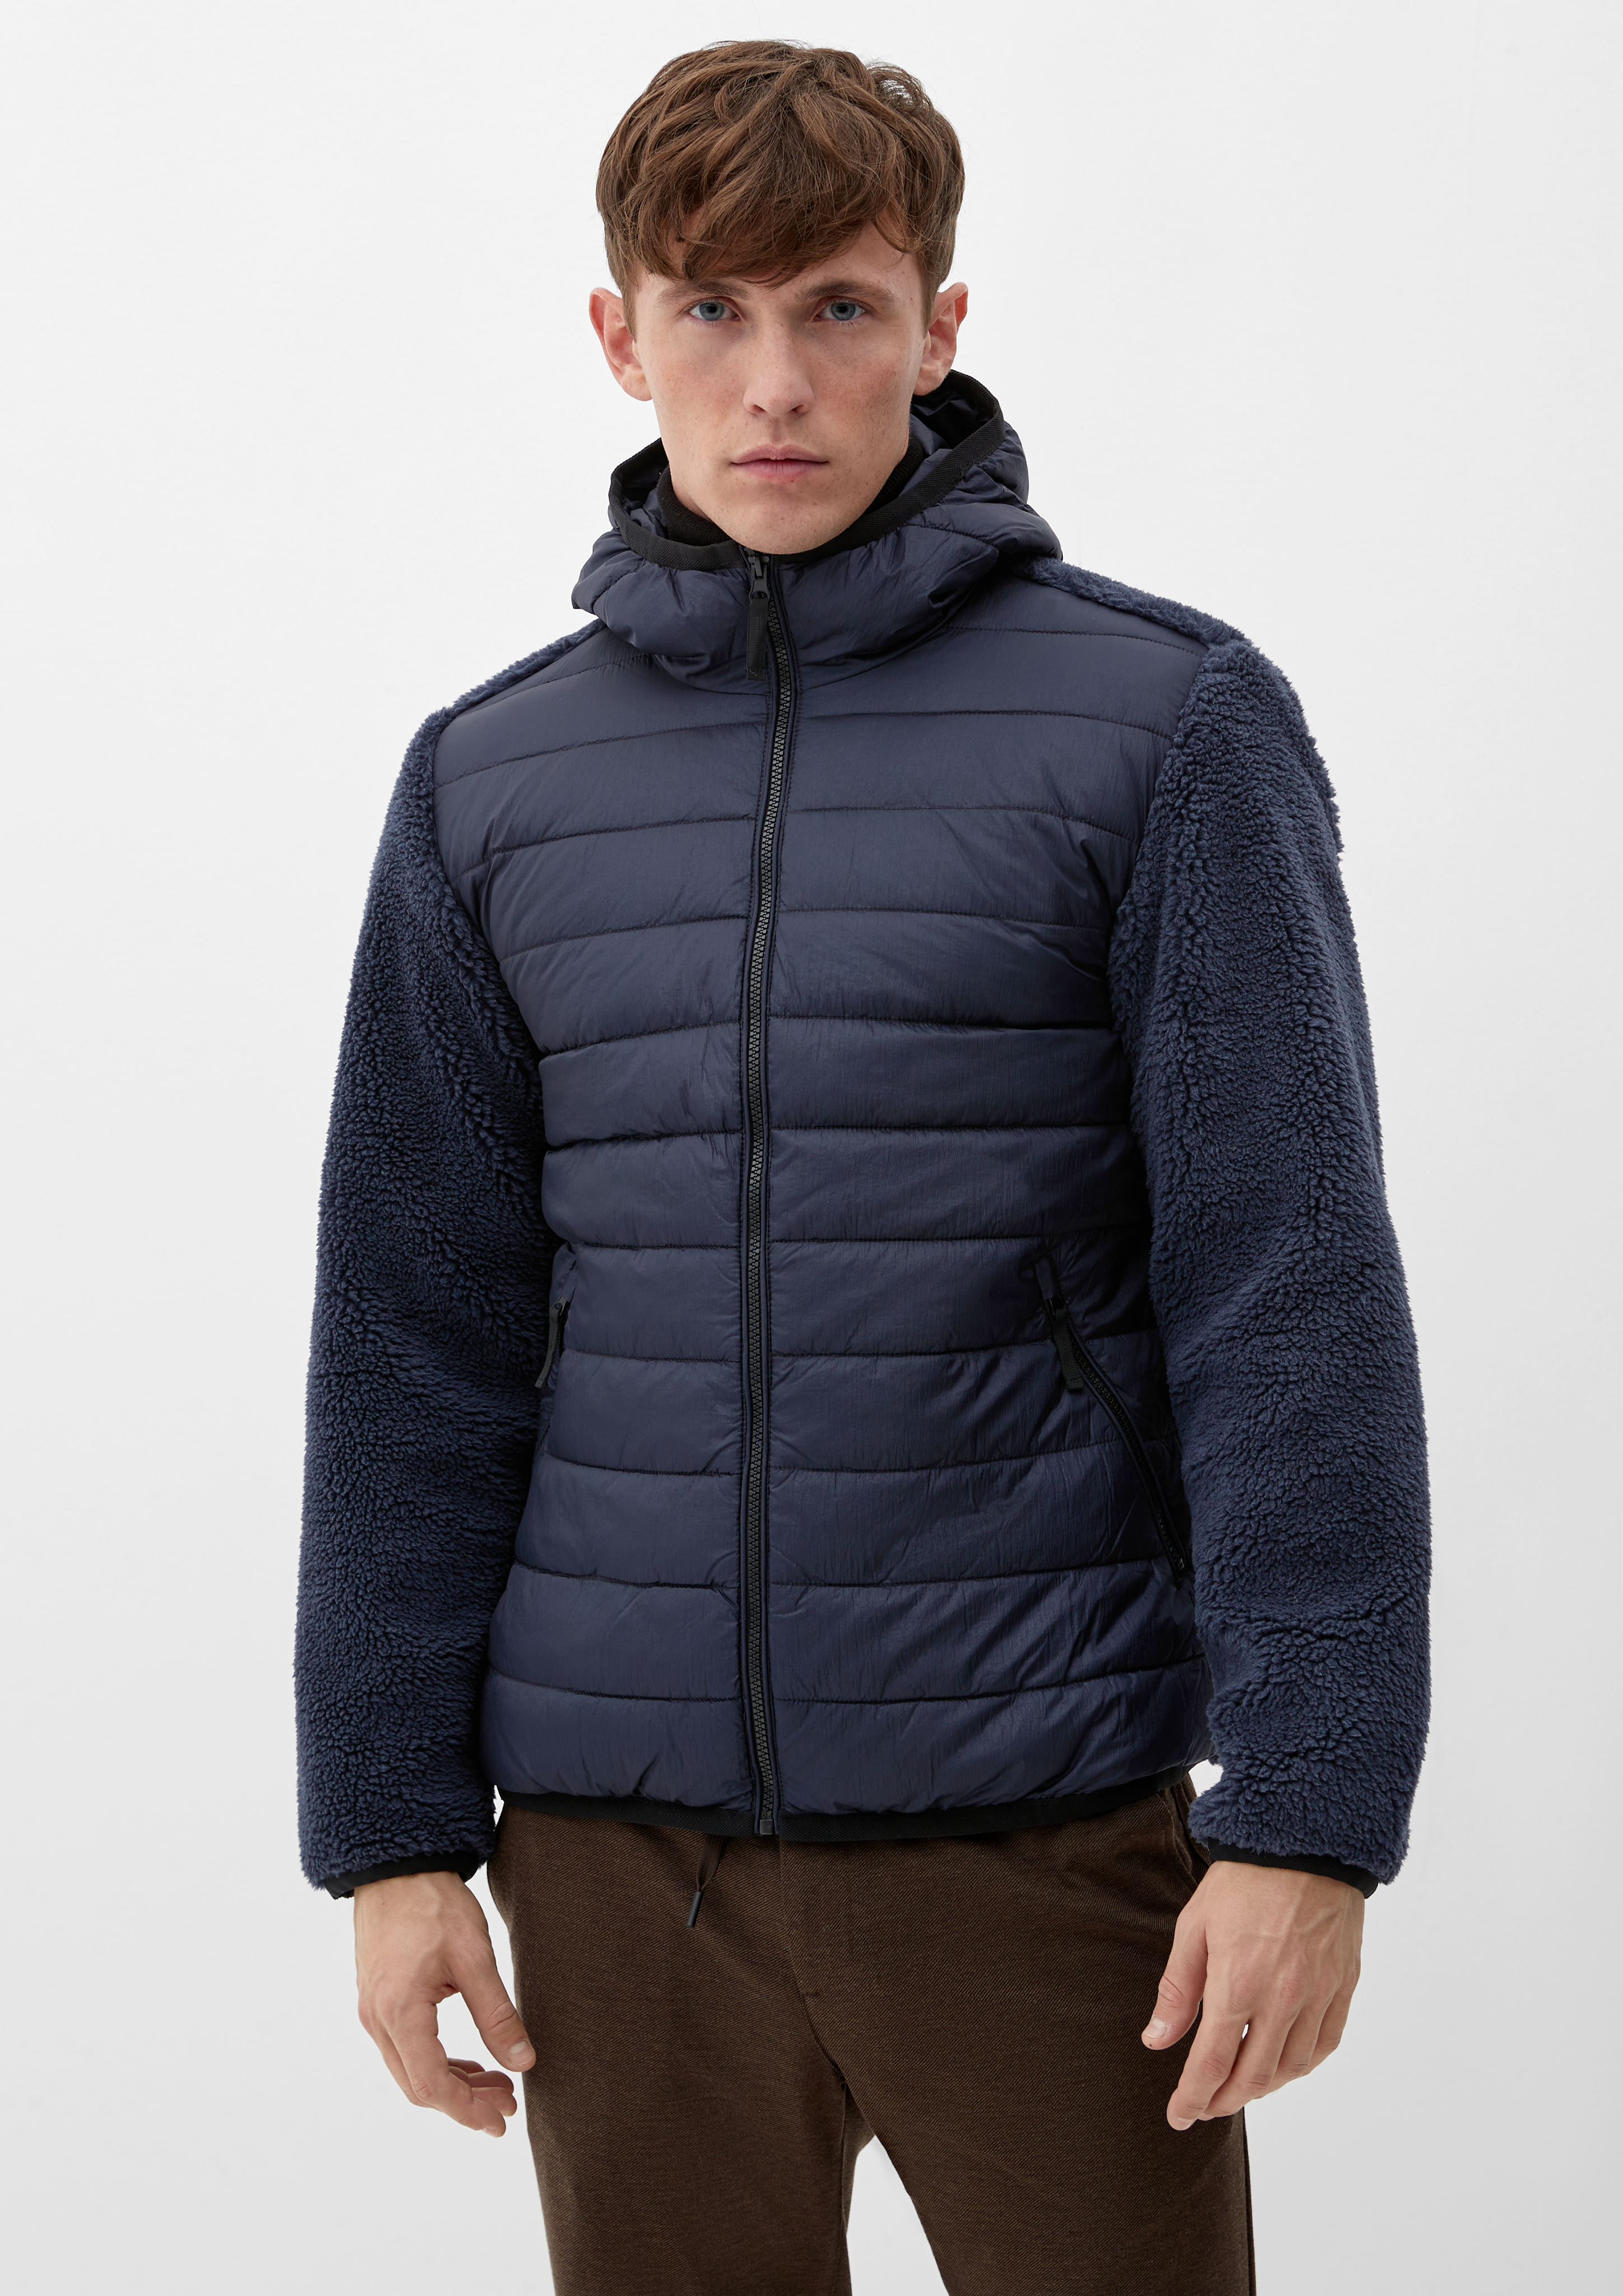 navy a mix materials Jacket in of -